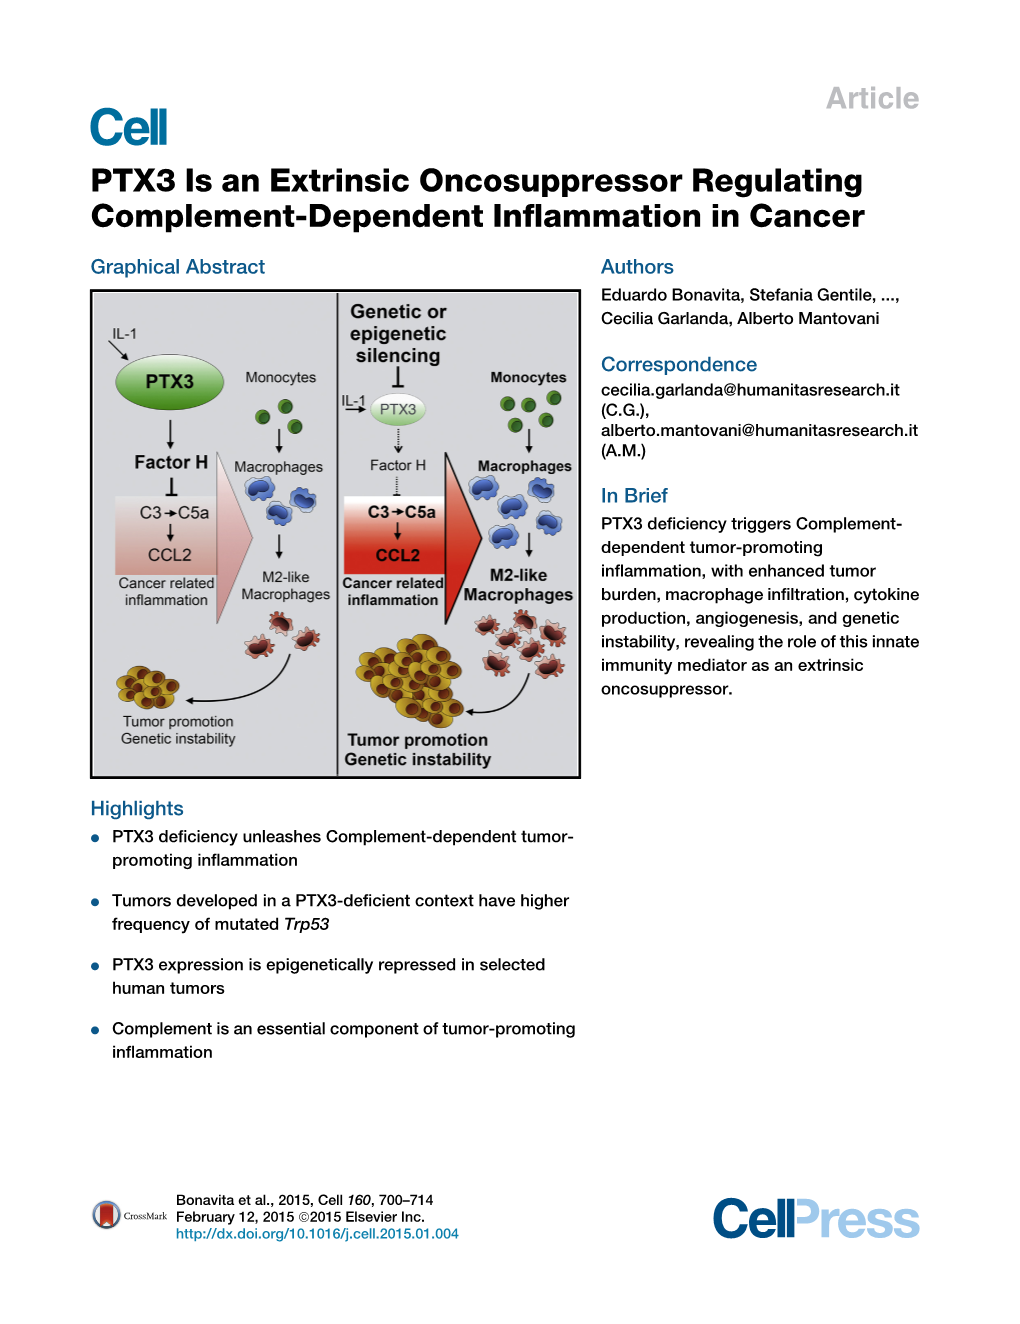 PTX3 Is an Extrinsic Oncosuppressor Regulating Complement-Dependent Inﬂammation in Cancer